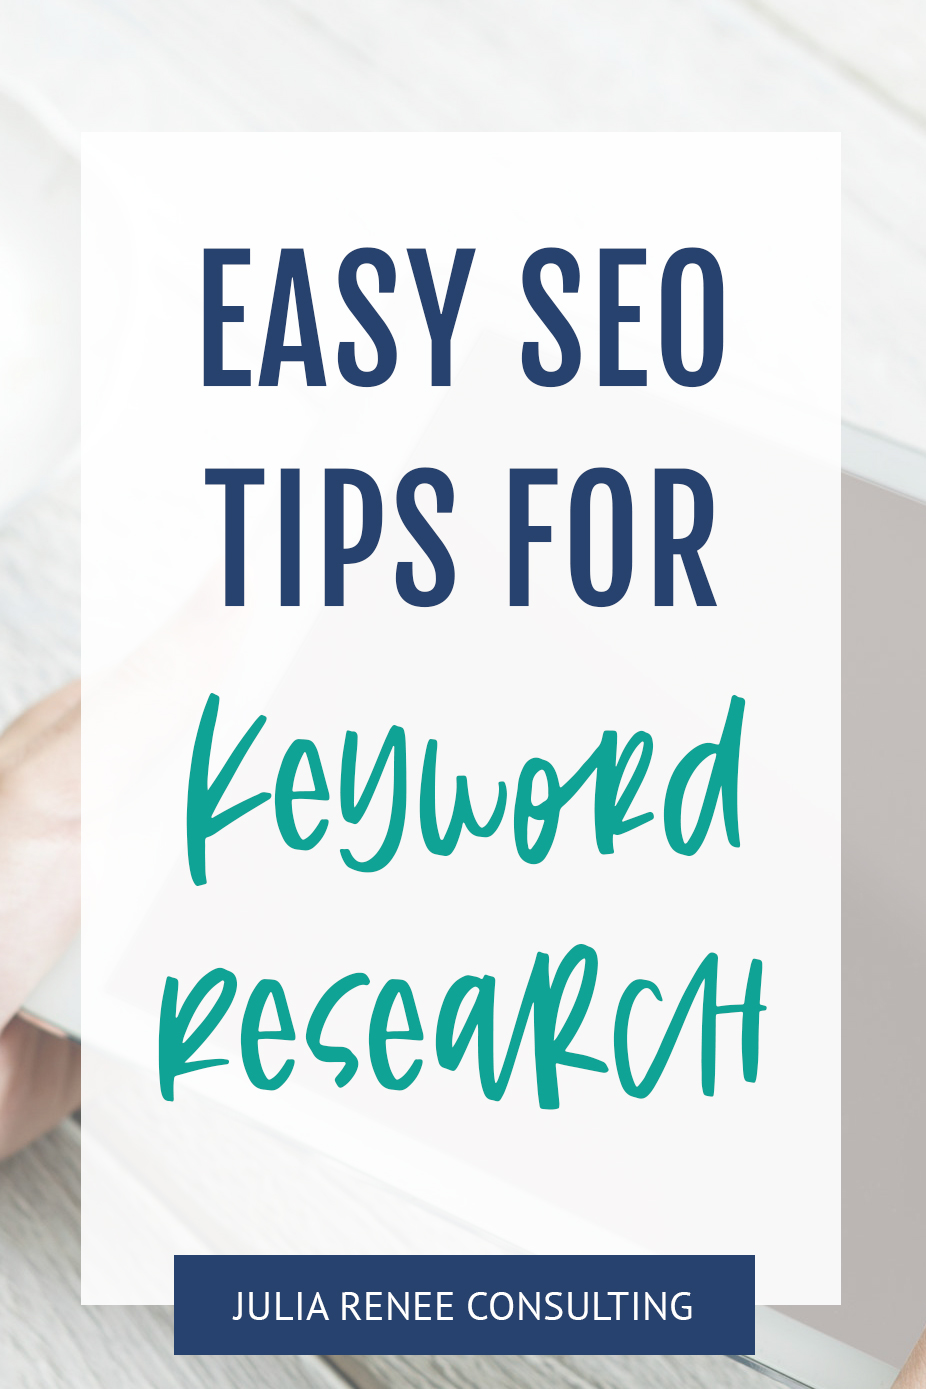 Tips for Keyword Research: Where to Find Keywords to Rank For